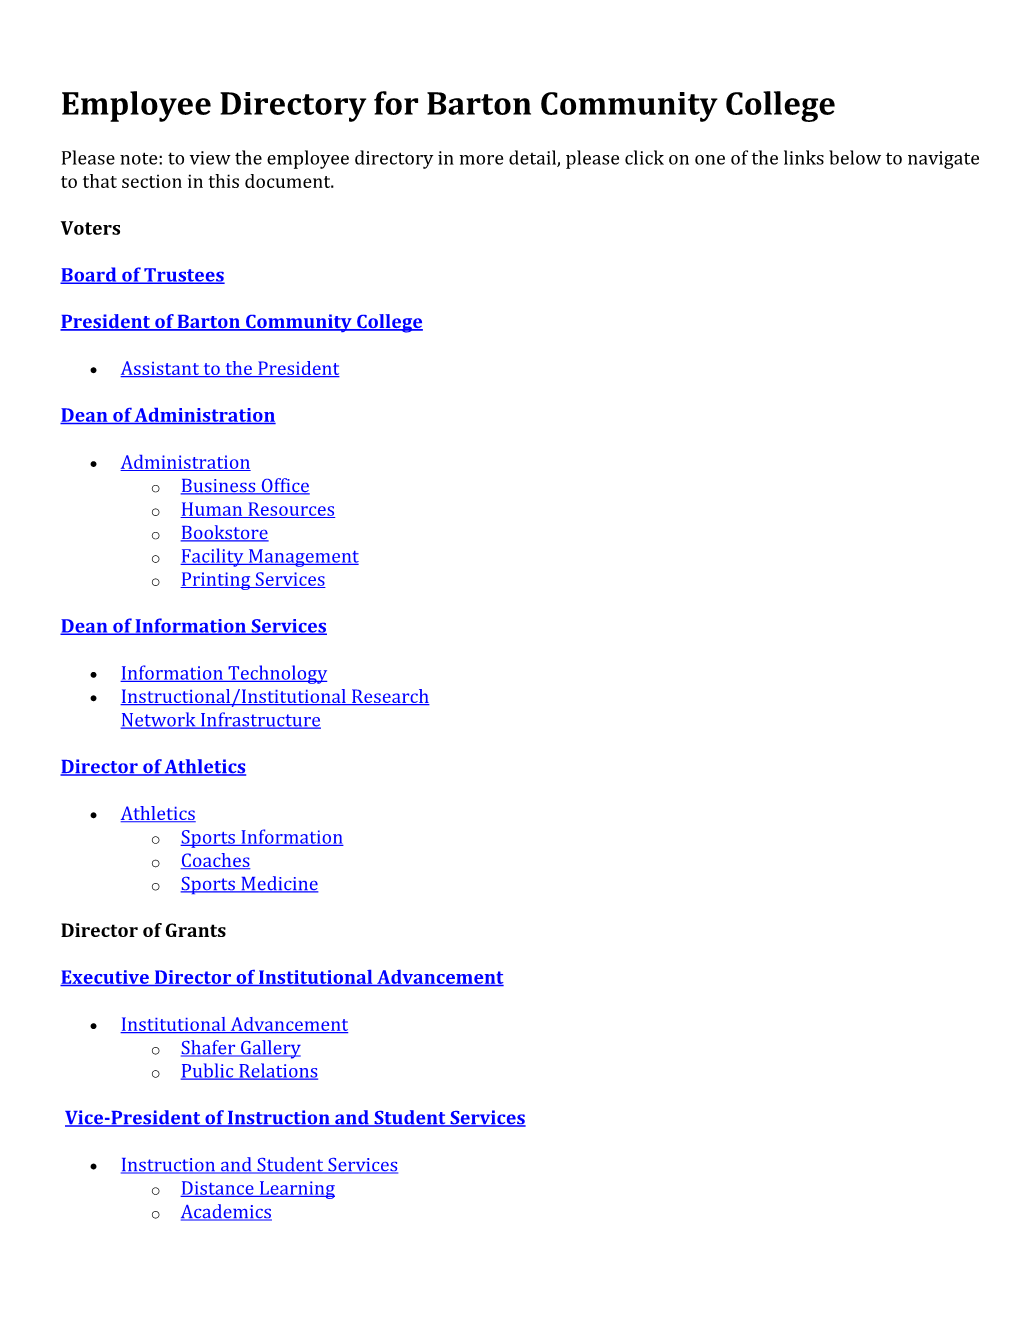 Employee Directory for Barton Community College